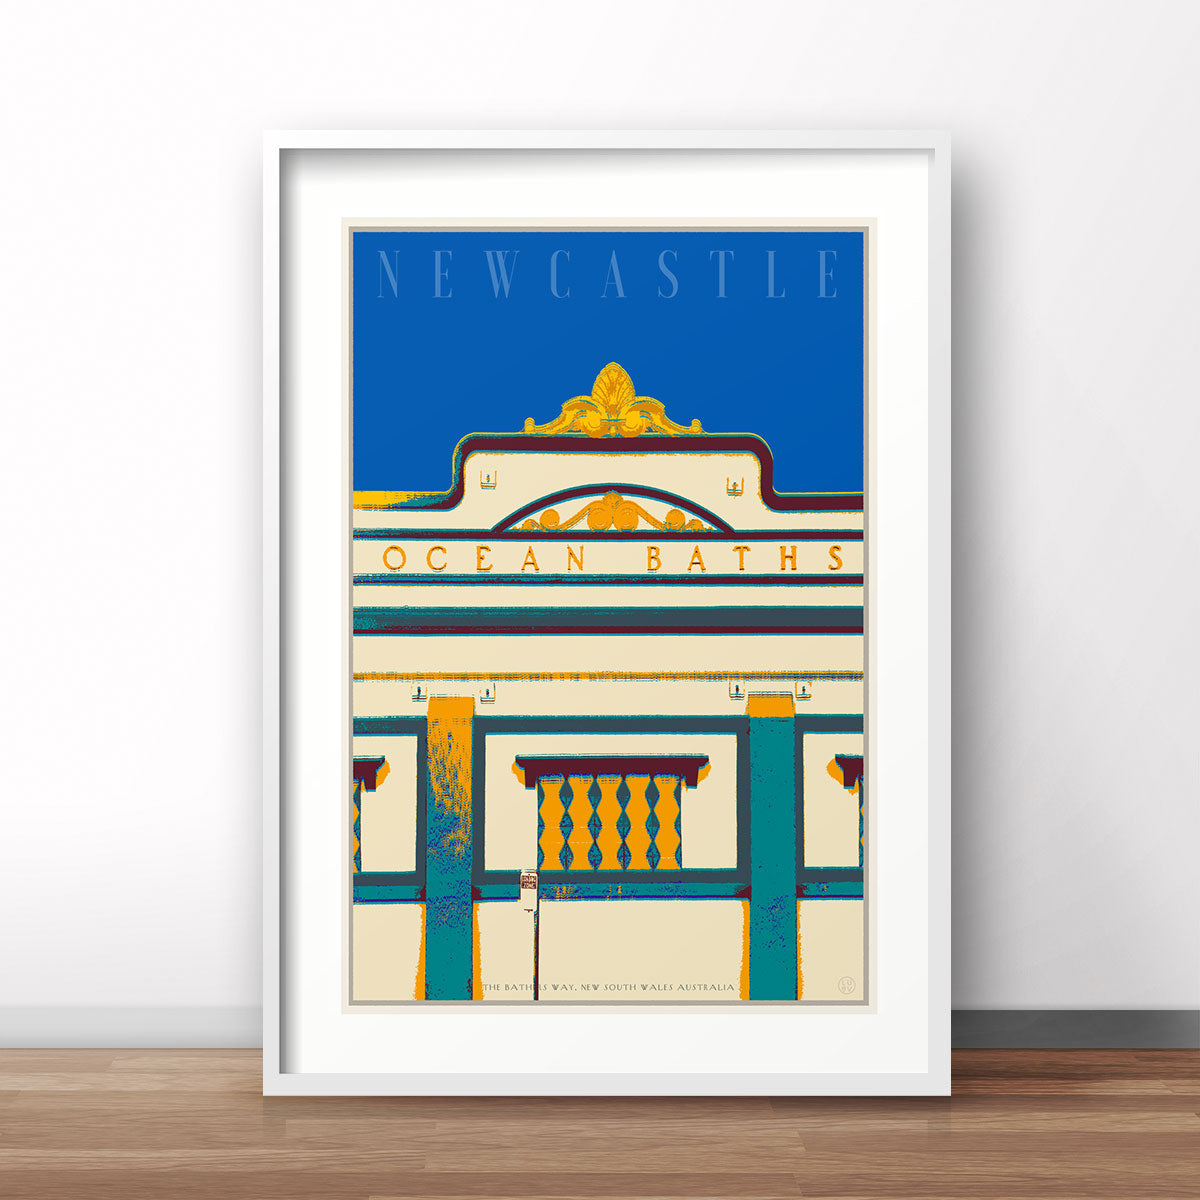 Newcastle baths deco pop travel poster print by Places We Luv